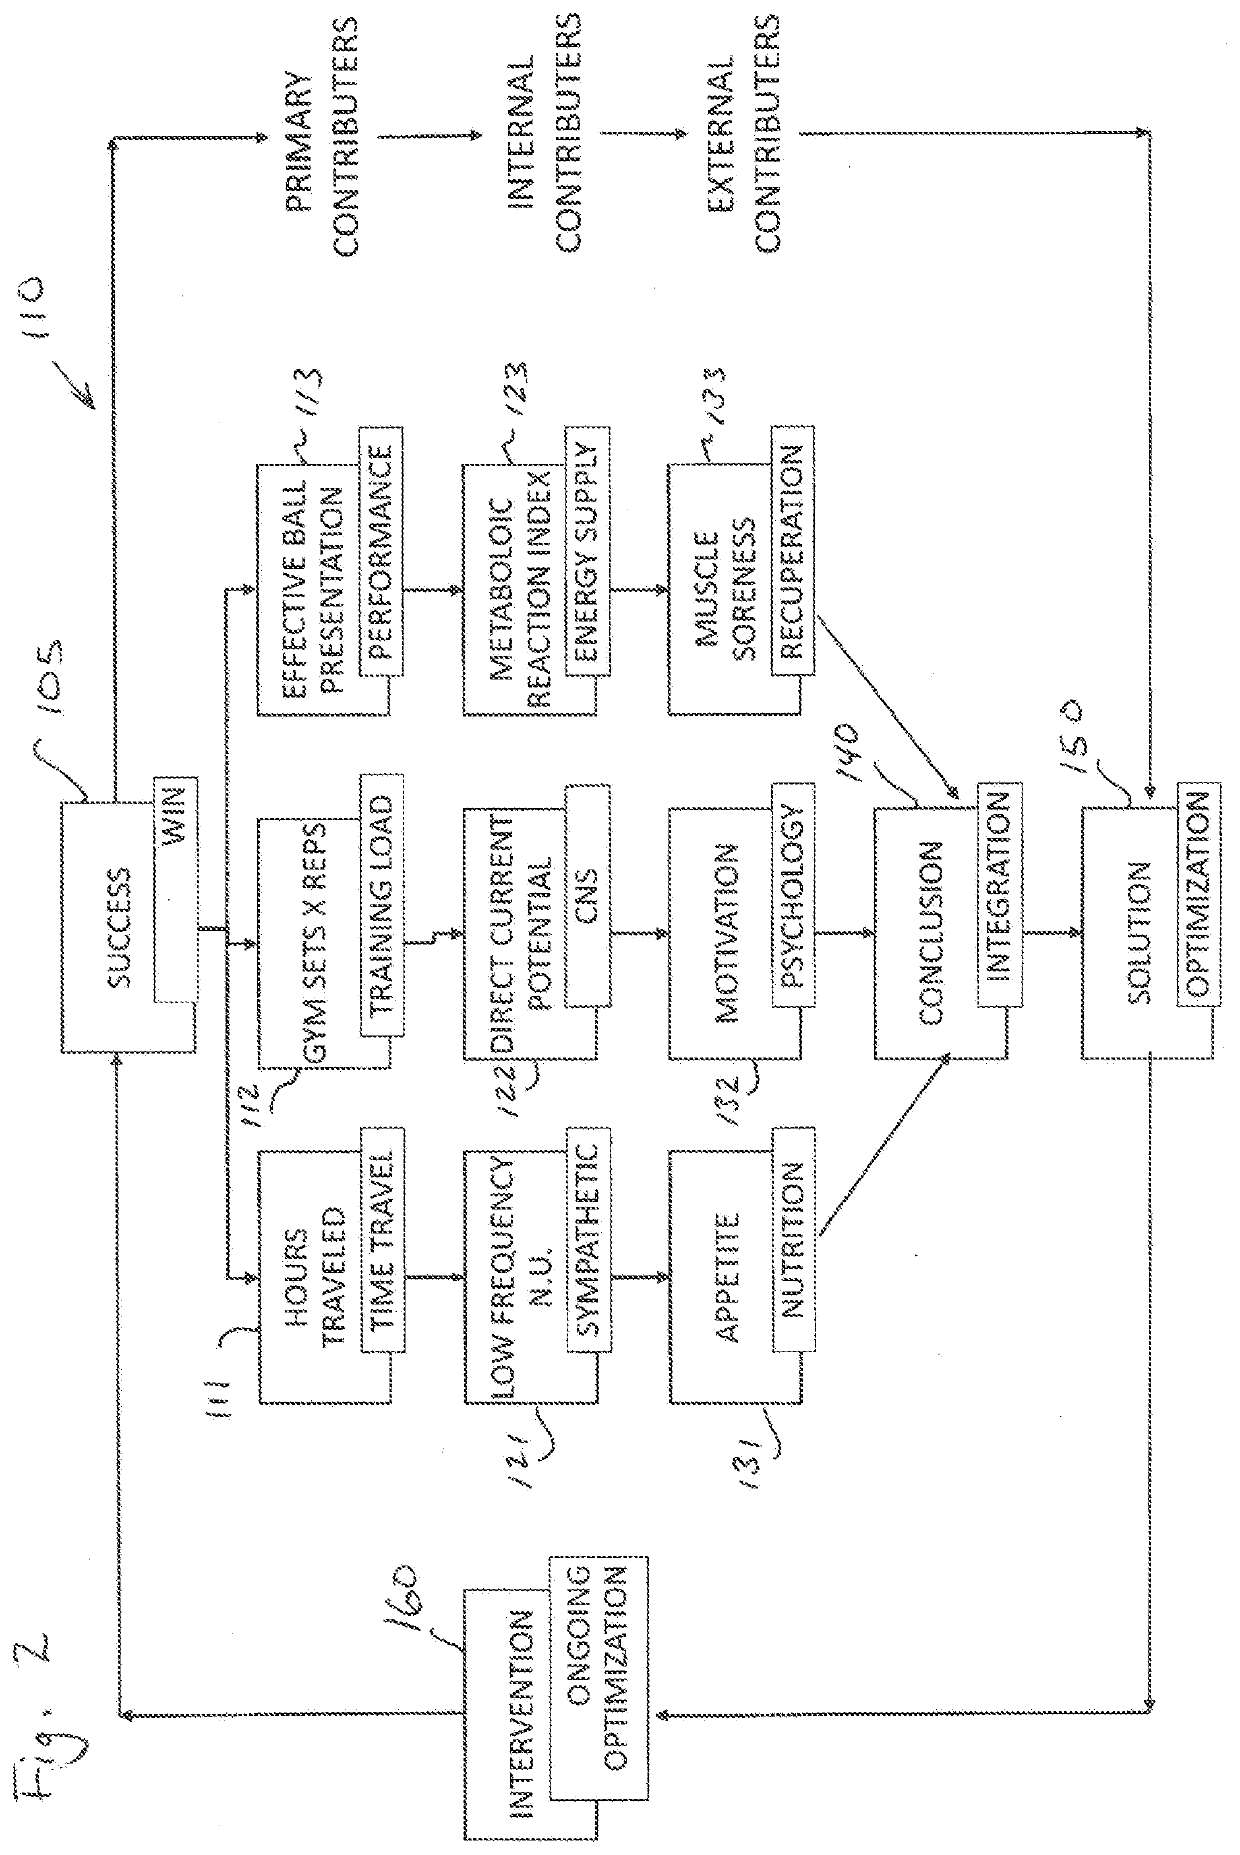 Predictive analytics method and system for positively adjusting fitness and/or well-being conditioning